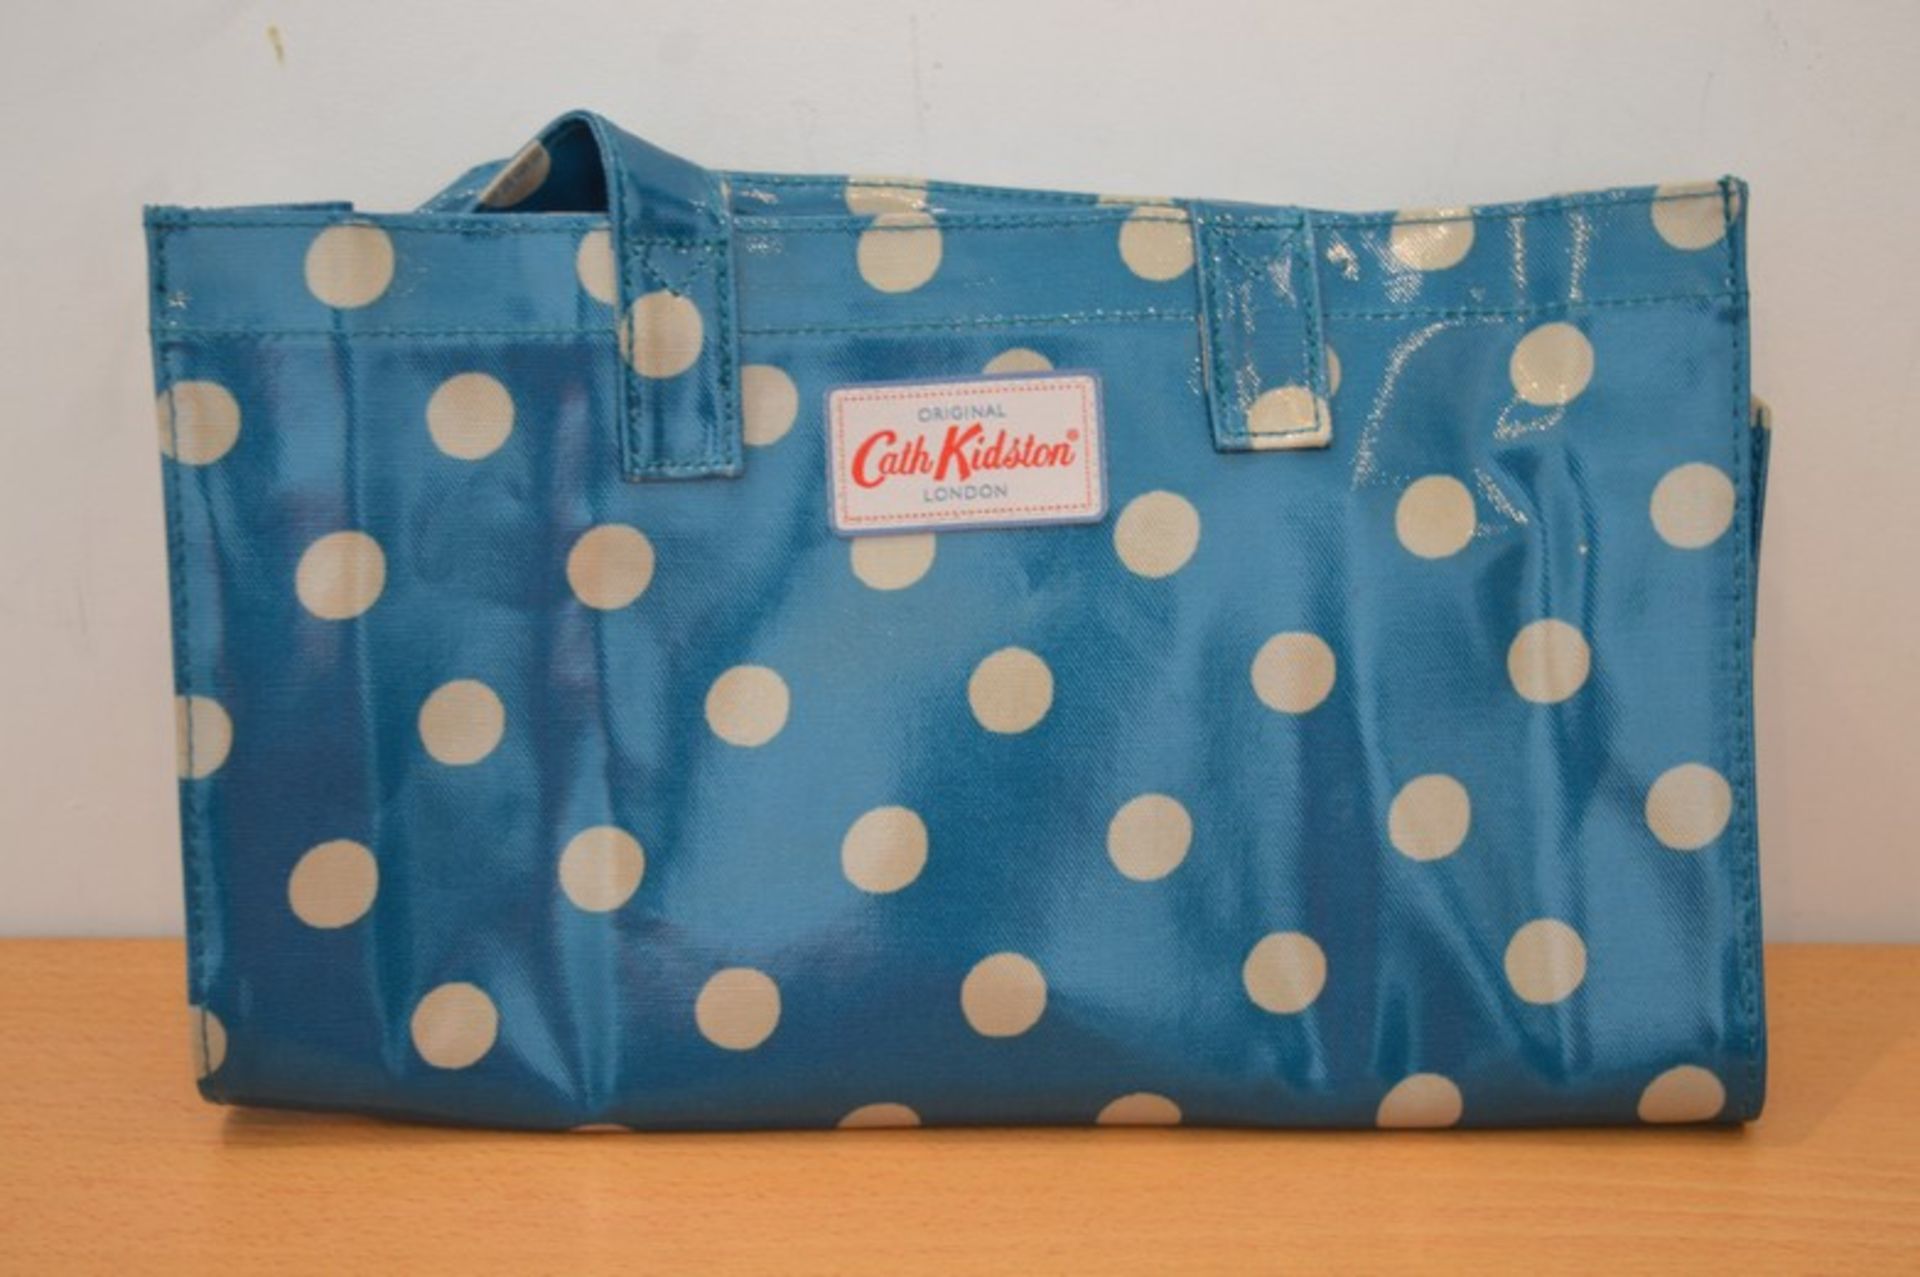 BRAND NEW WITH LABELS CATH KIDSTON POKER DOT LADIES BAG RRP £65 (DSCLIP)(20.05.15)